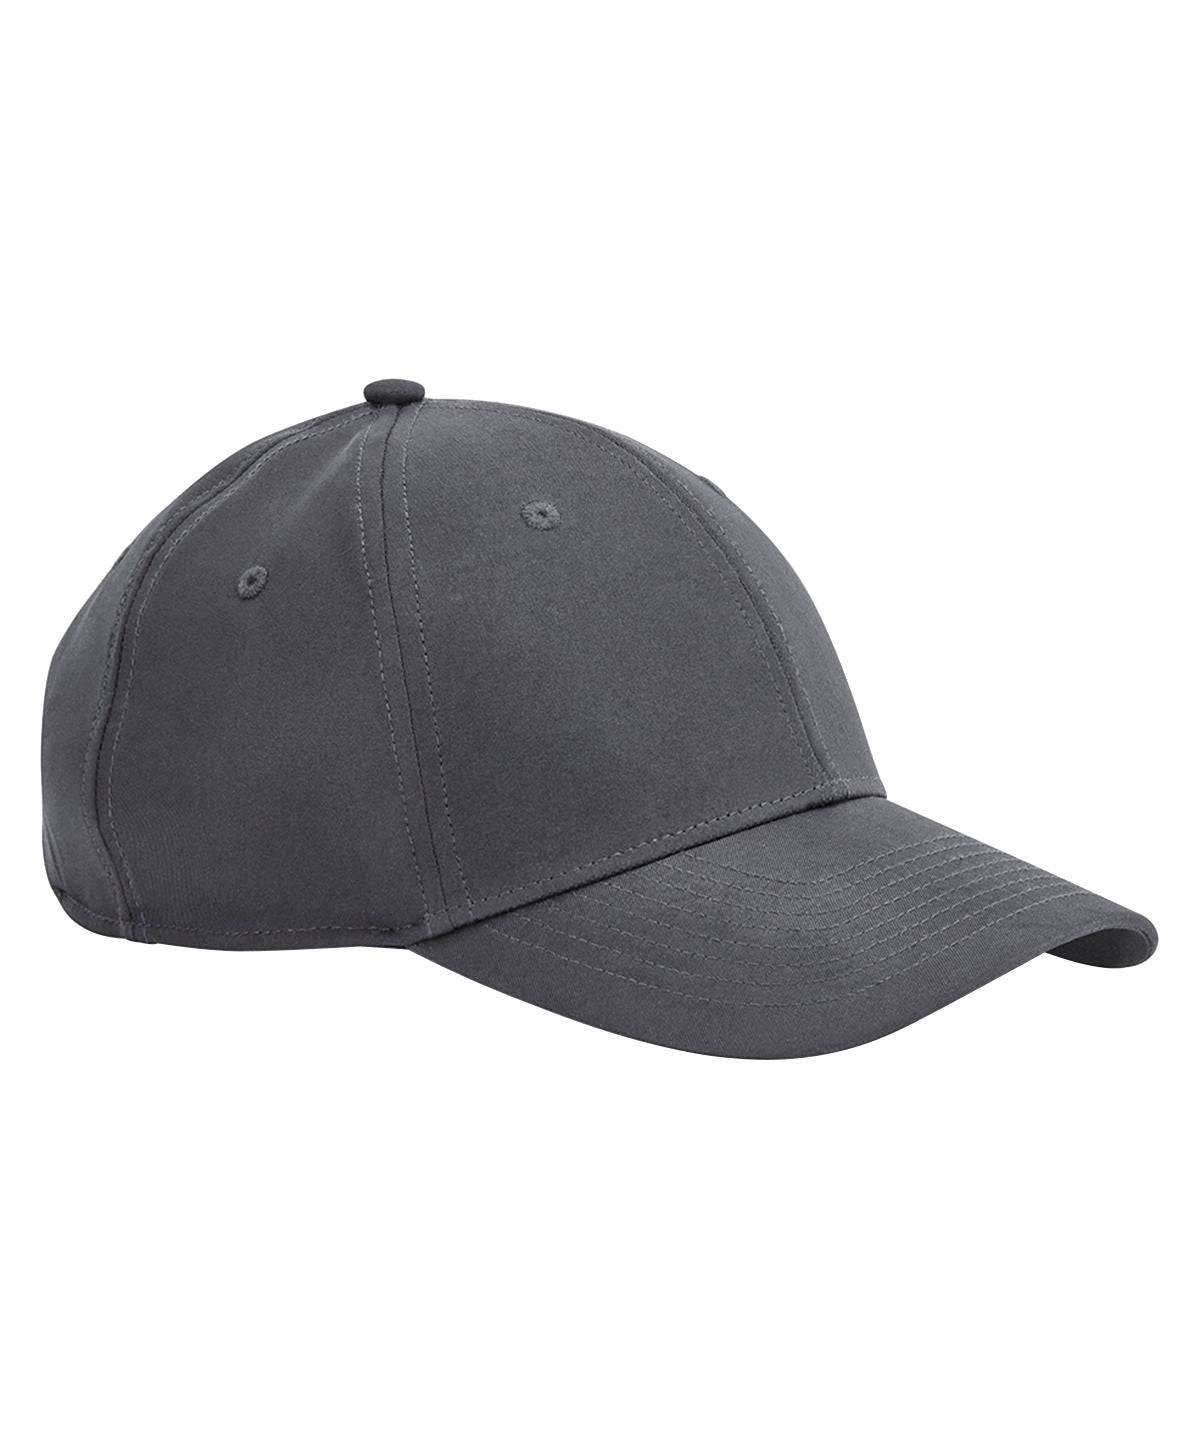 Load image into Gallery viewer, Graphite Grey - Multi-sports performance cap
